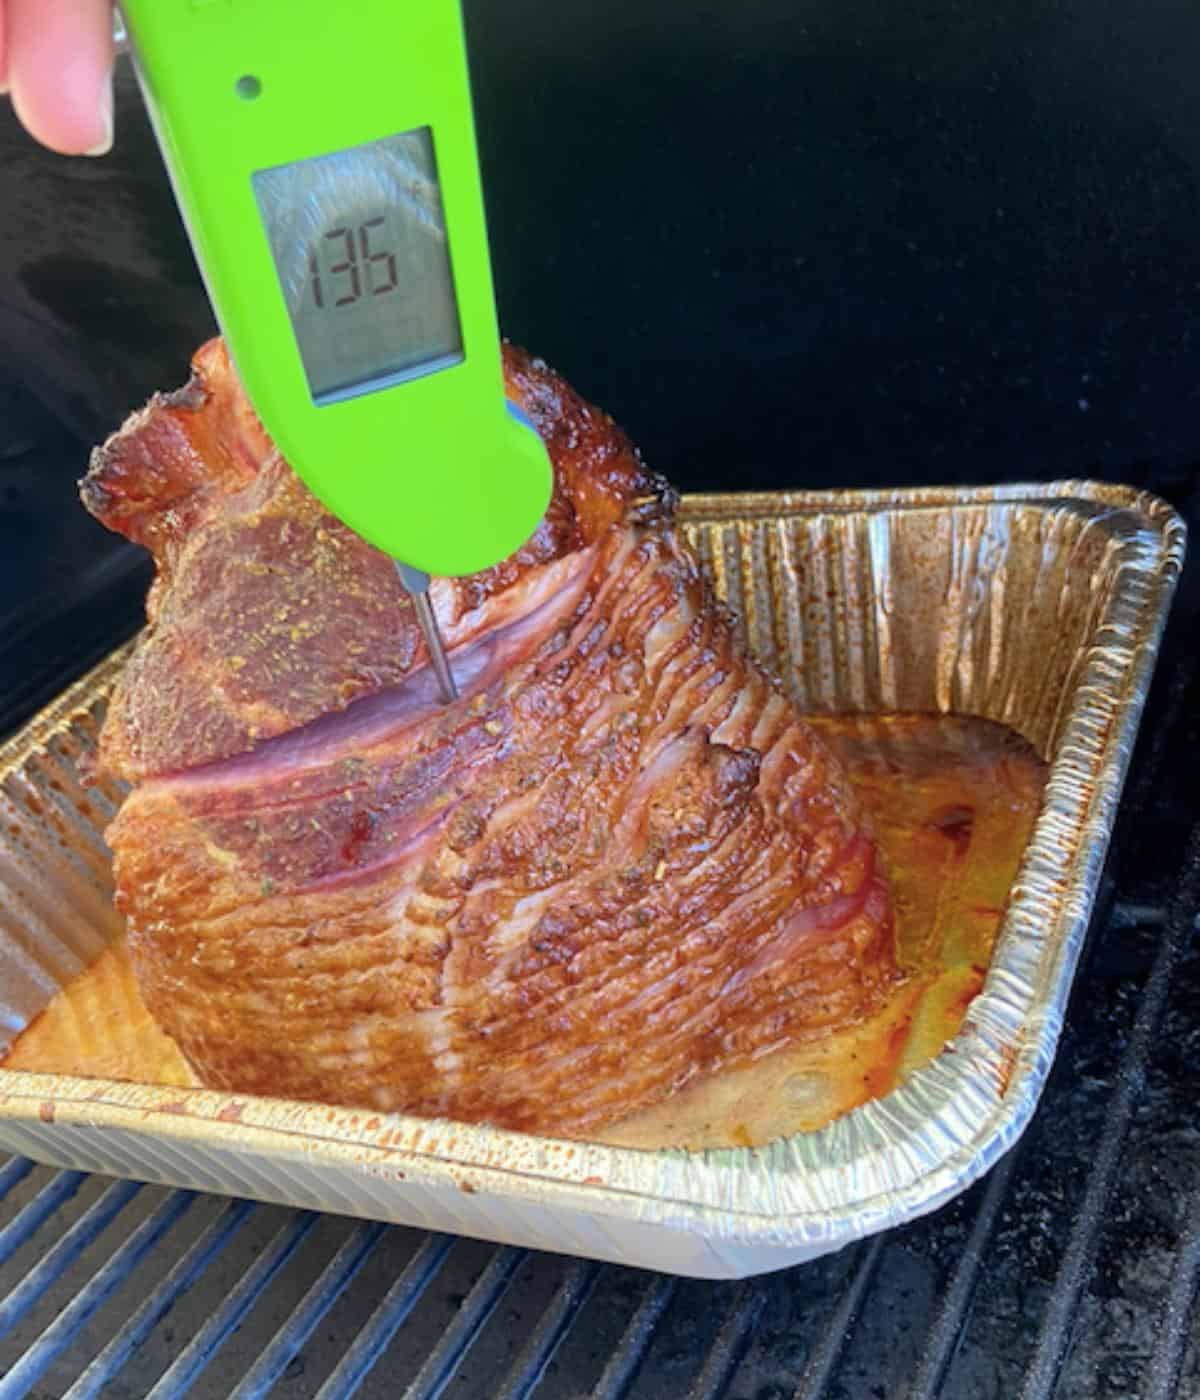 thermometer showing a reading of 135 from the ham in smoker